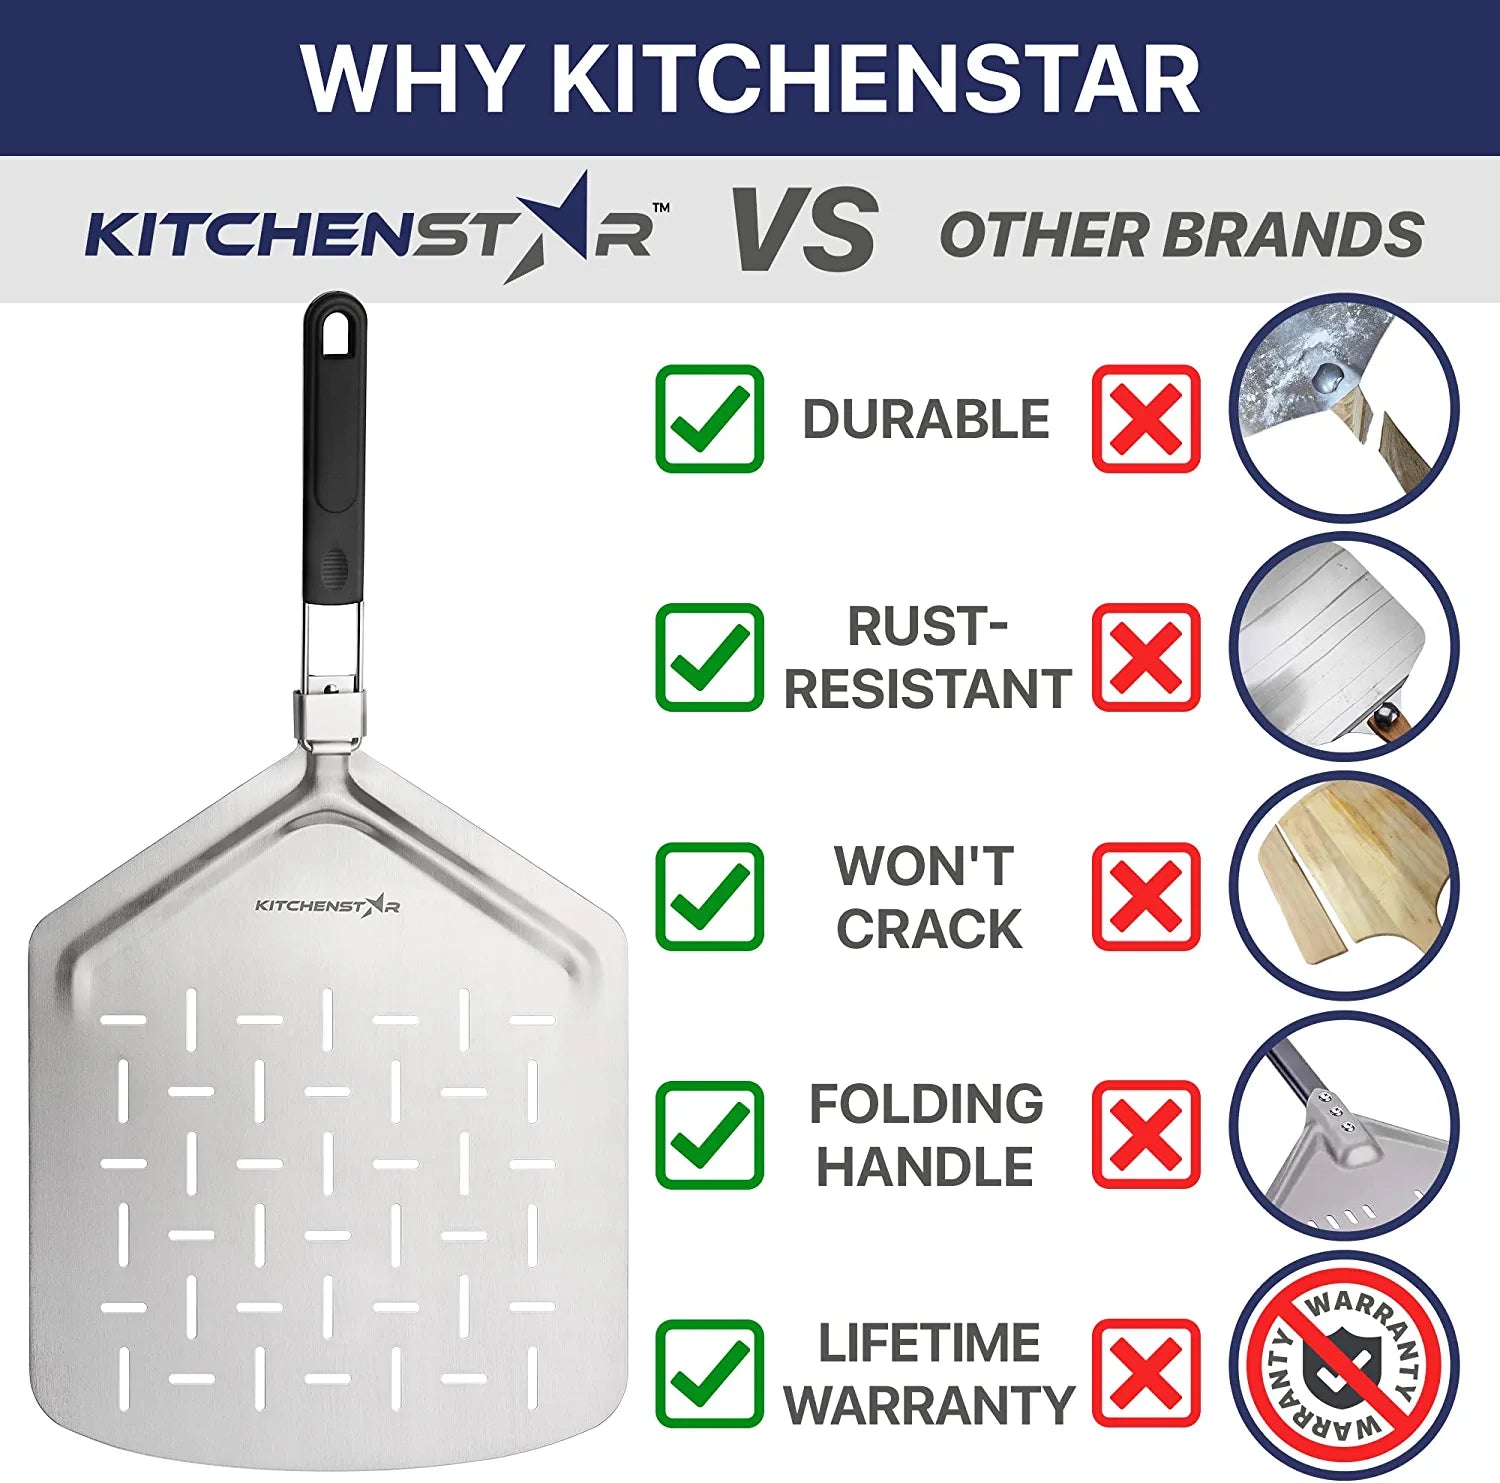 KitchenStar Perforated Stainless Steel Pizza Peel with Folding Handle (13 x 16.5 Inches) for Oven Pizza Turning, Placement and Retrieving - Professional Baking Tools Series